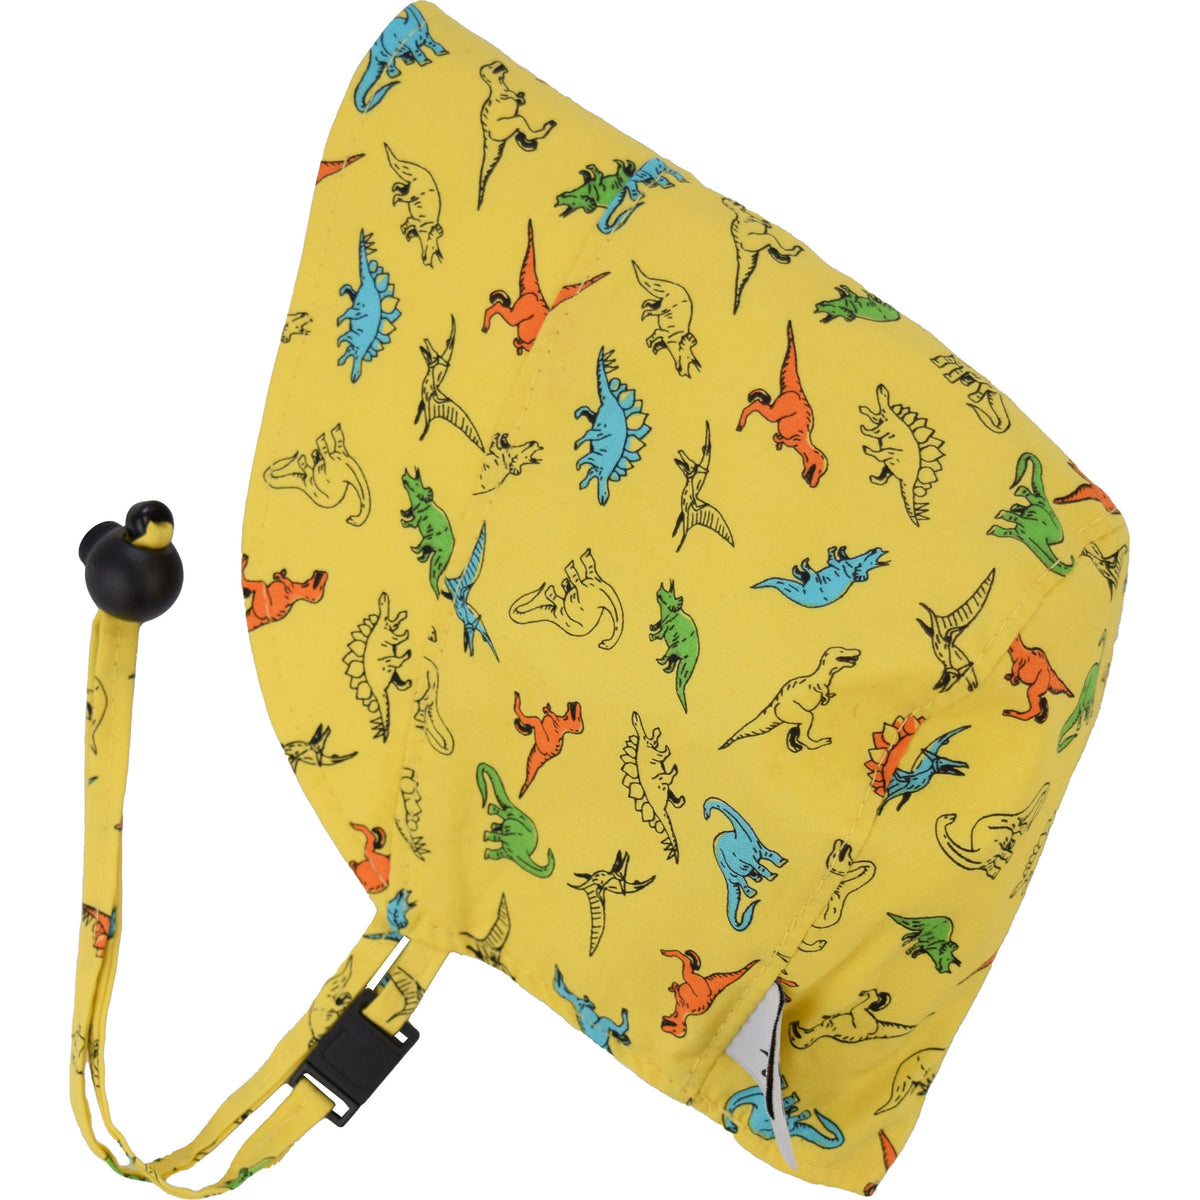 Infant and Toddler Sun Protection  Summer Bonnets with UPF50 Sun Protection. A chin tie with toggle and break away clip keep bonnet safely on head. Made in Canada by Puffin Gear -Dinosaur Print